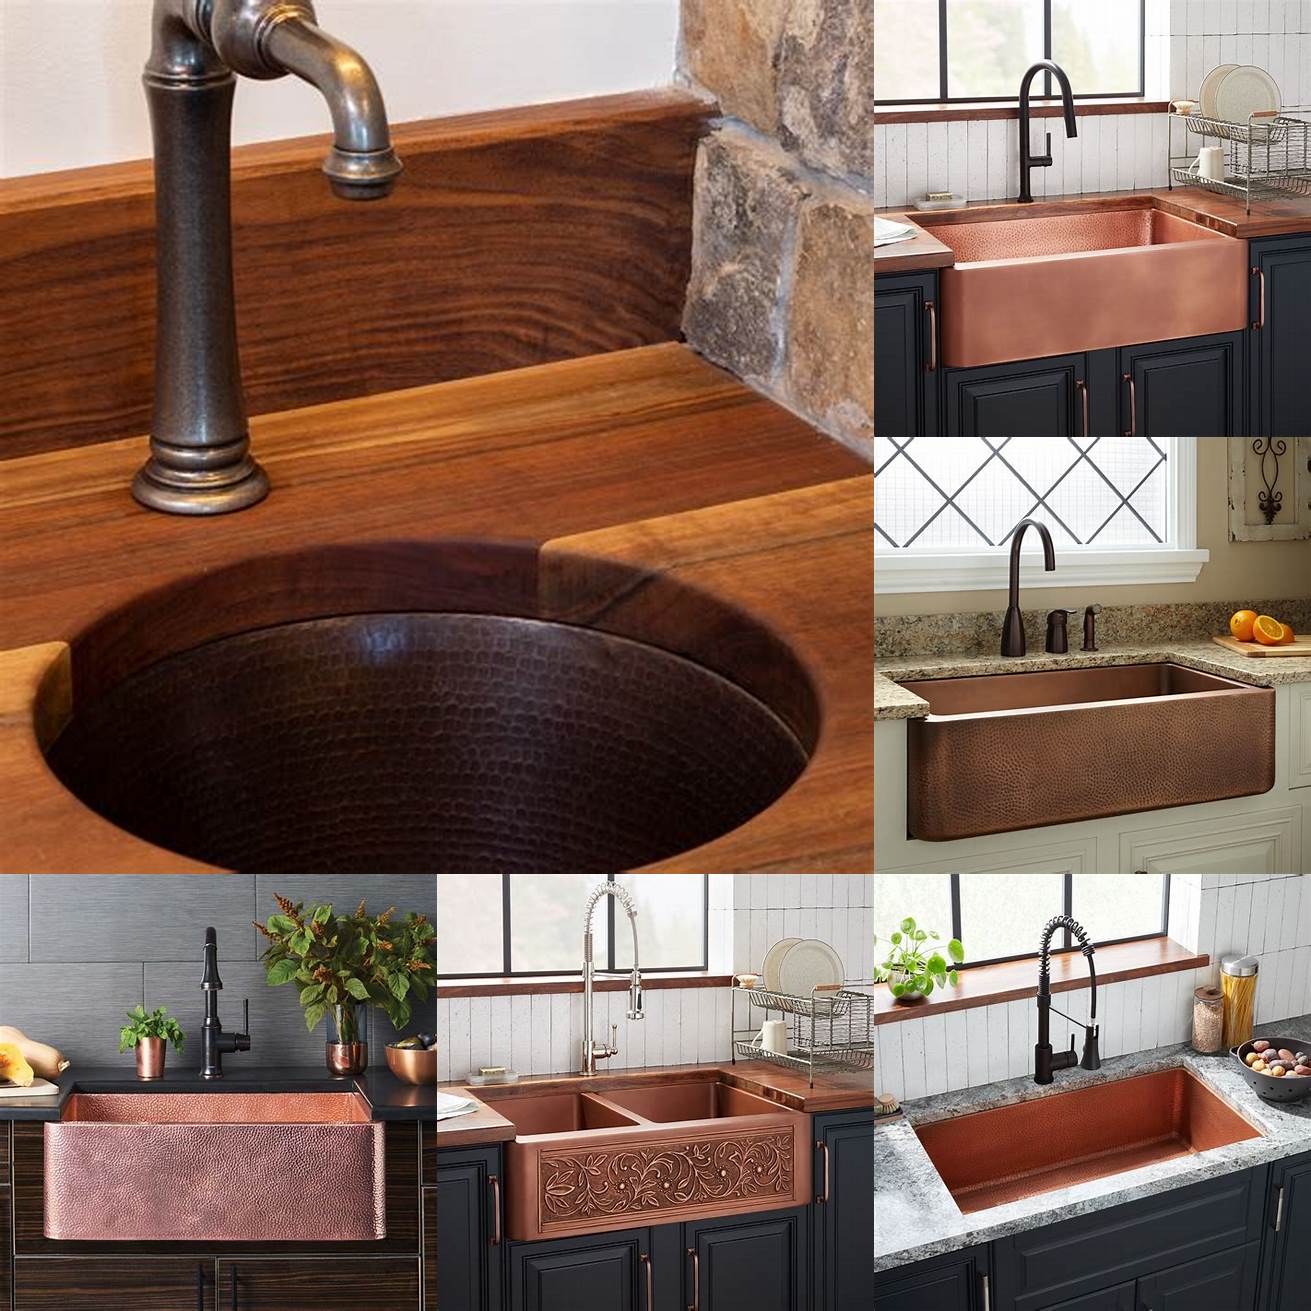 Handcrafted Wood Finish with Copper Sink